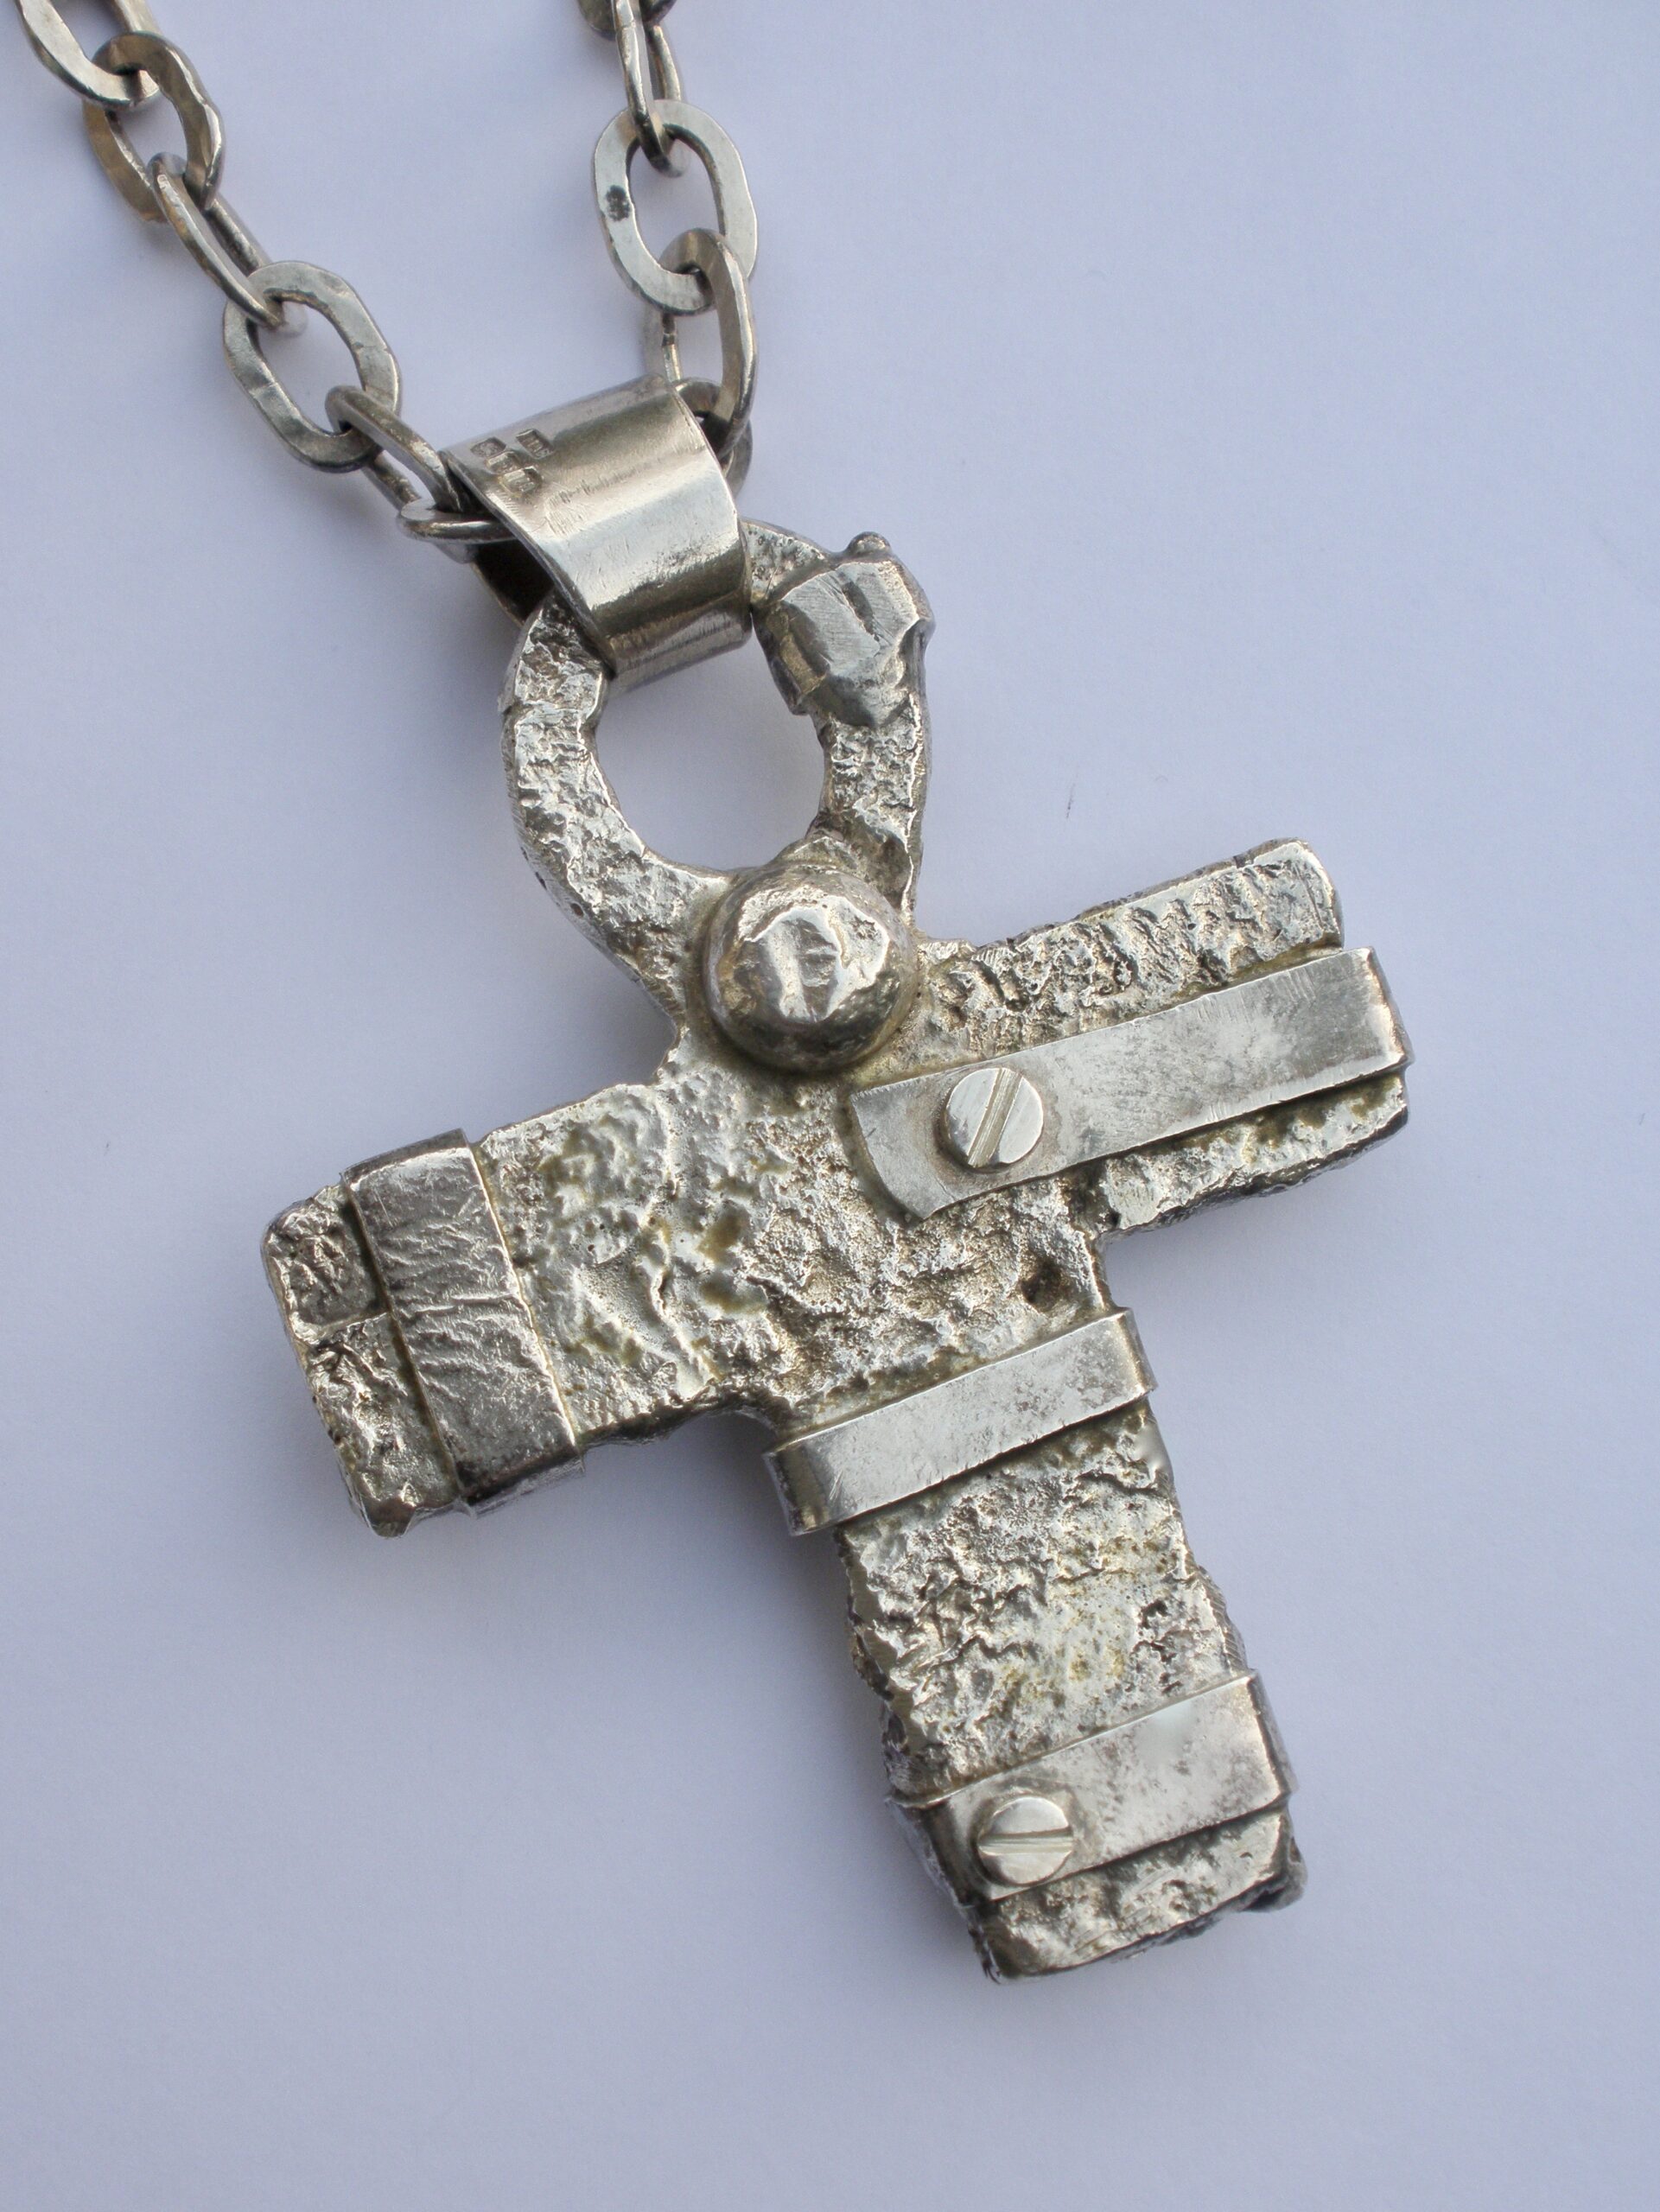 Michael Allen Bolton, silver and gold cross/Ankh pendant on chain ...